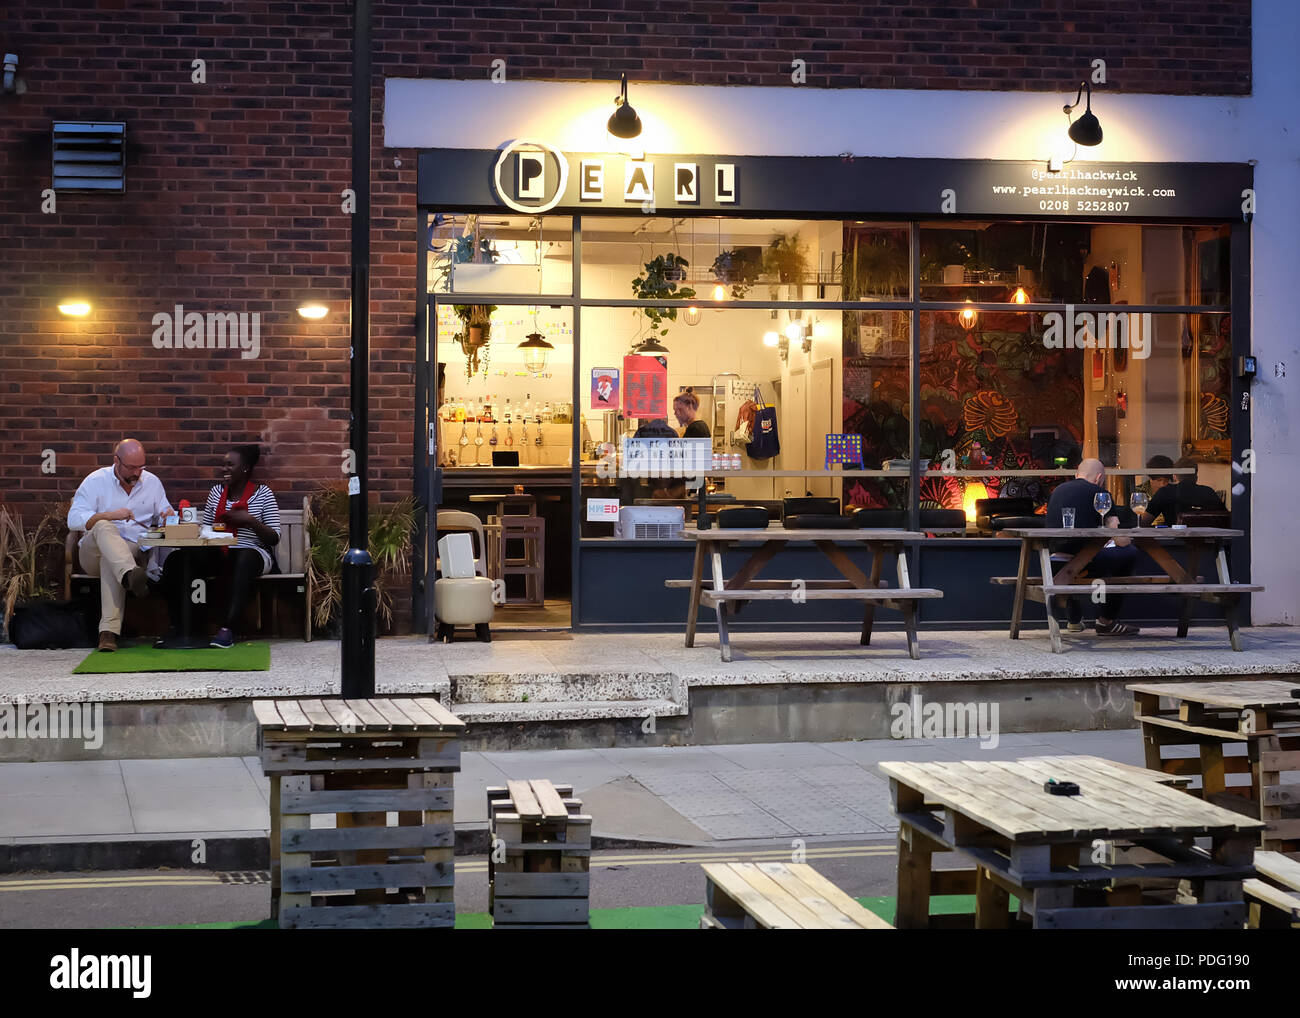 External view of Pearl Hackney Wick, bar and cafe in East London, after dark Stock Photo